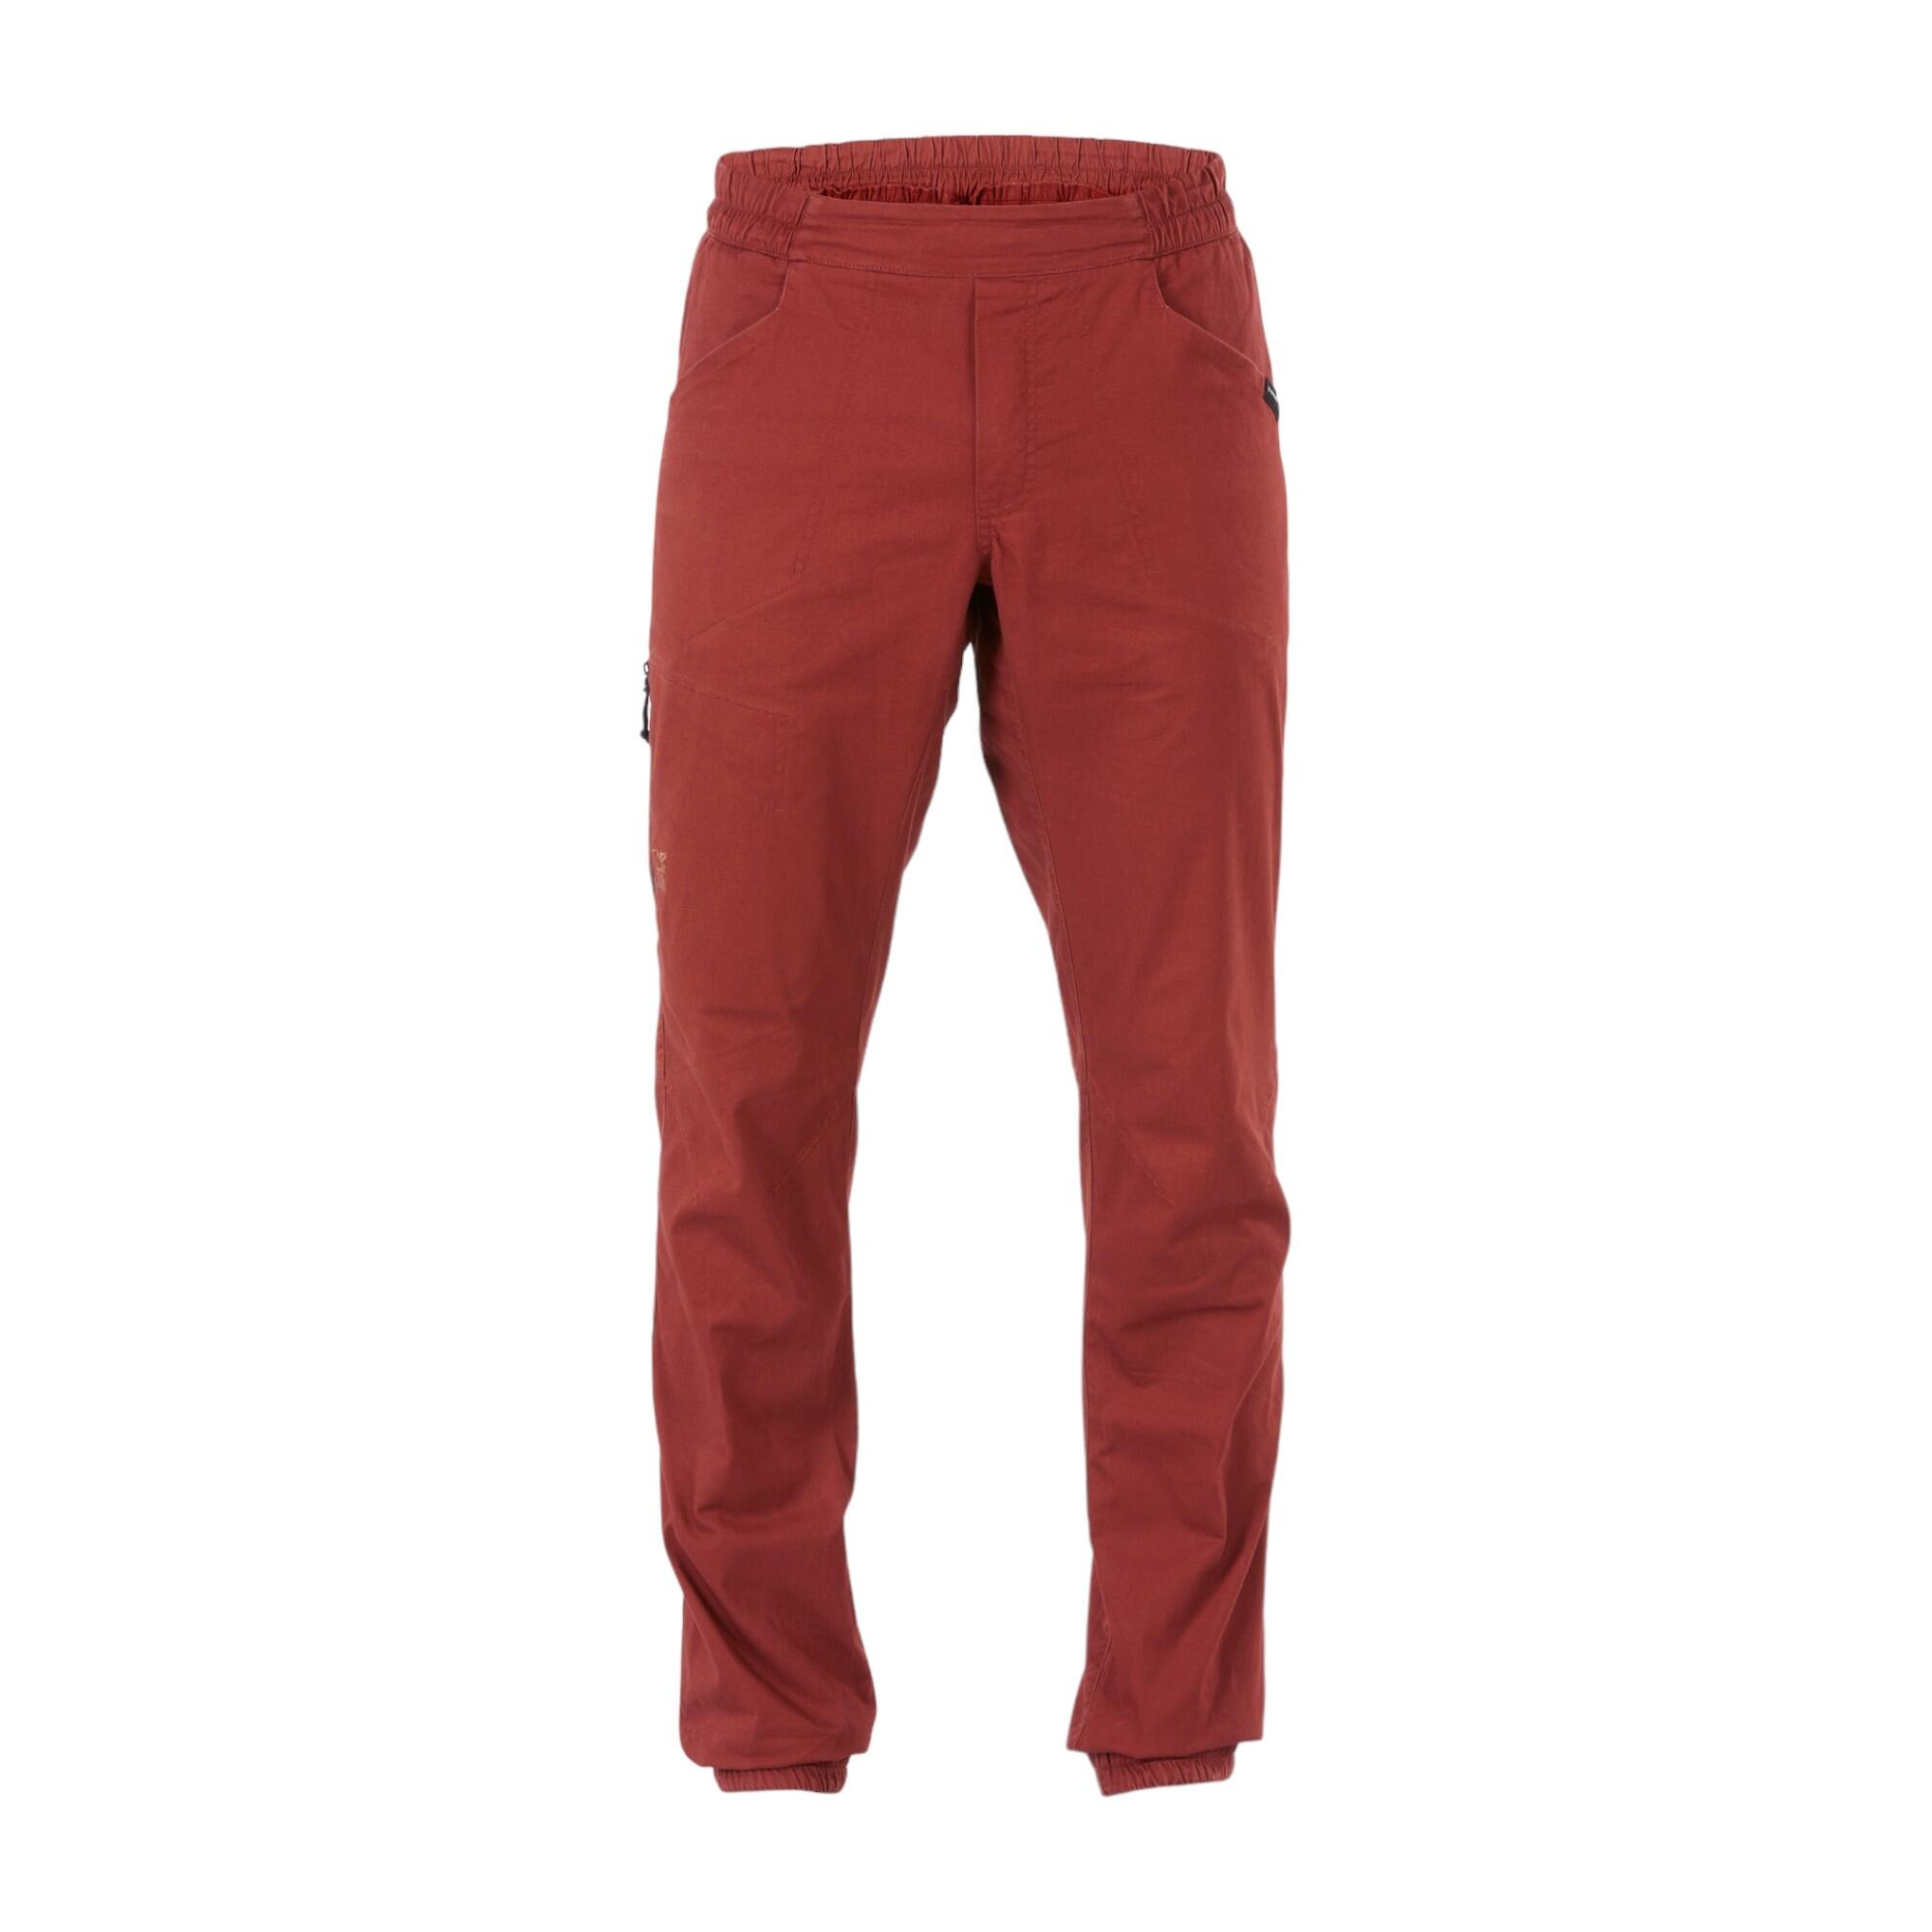 Climbing Trousers and Leggings